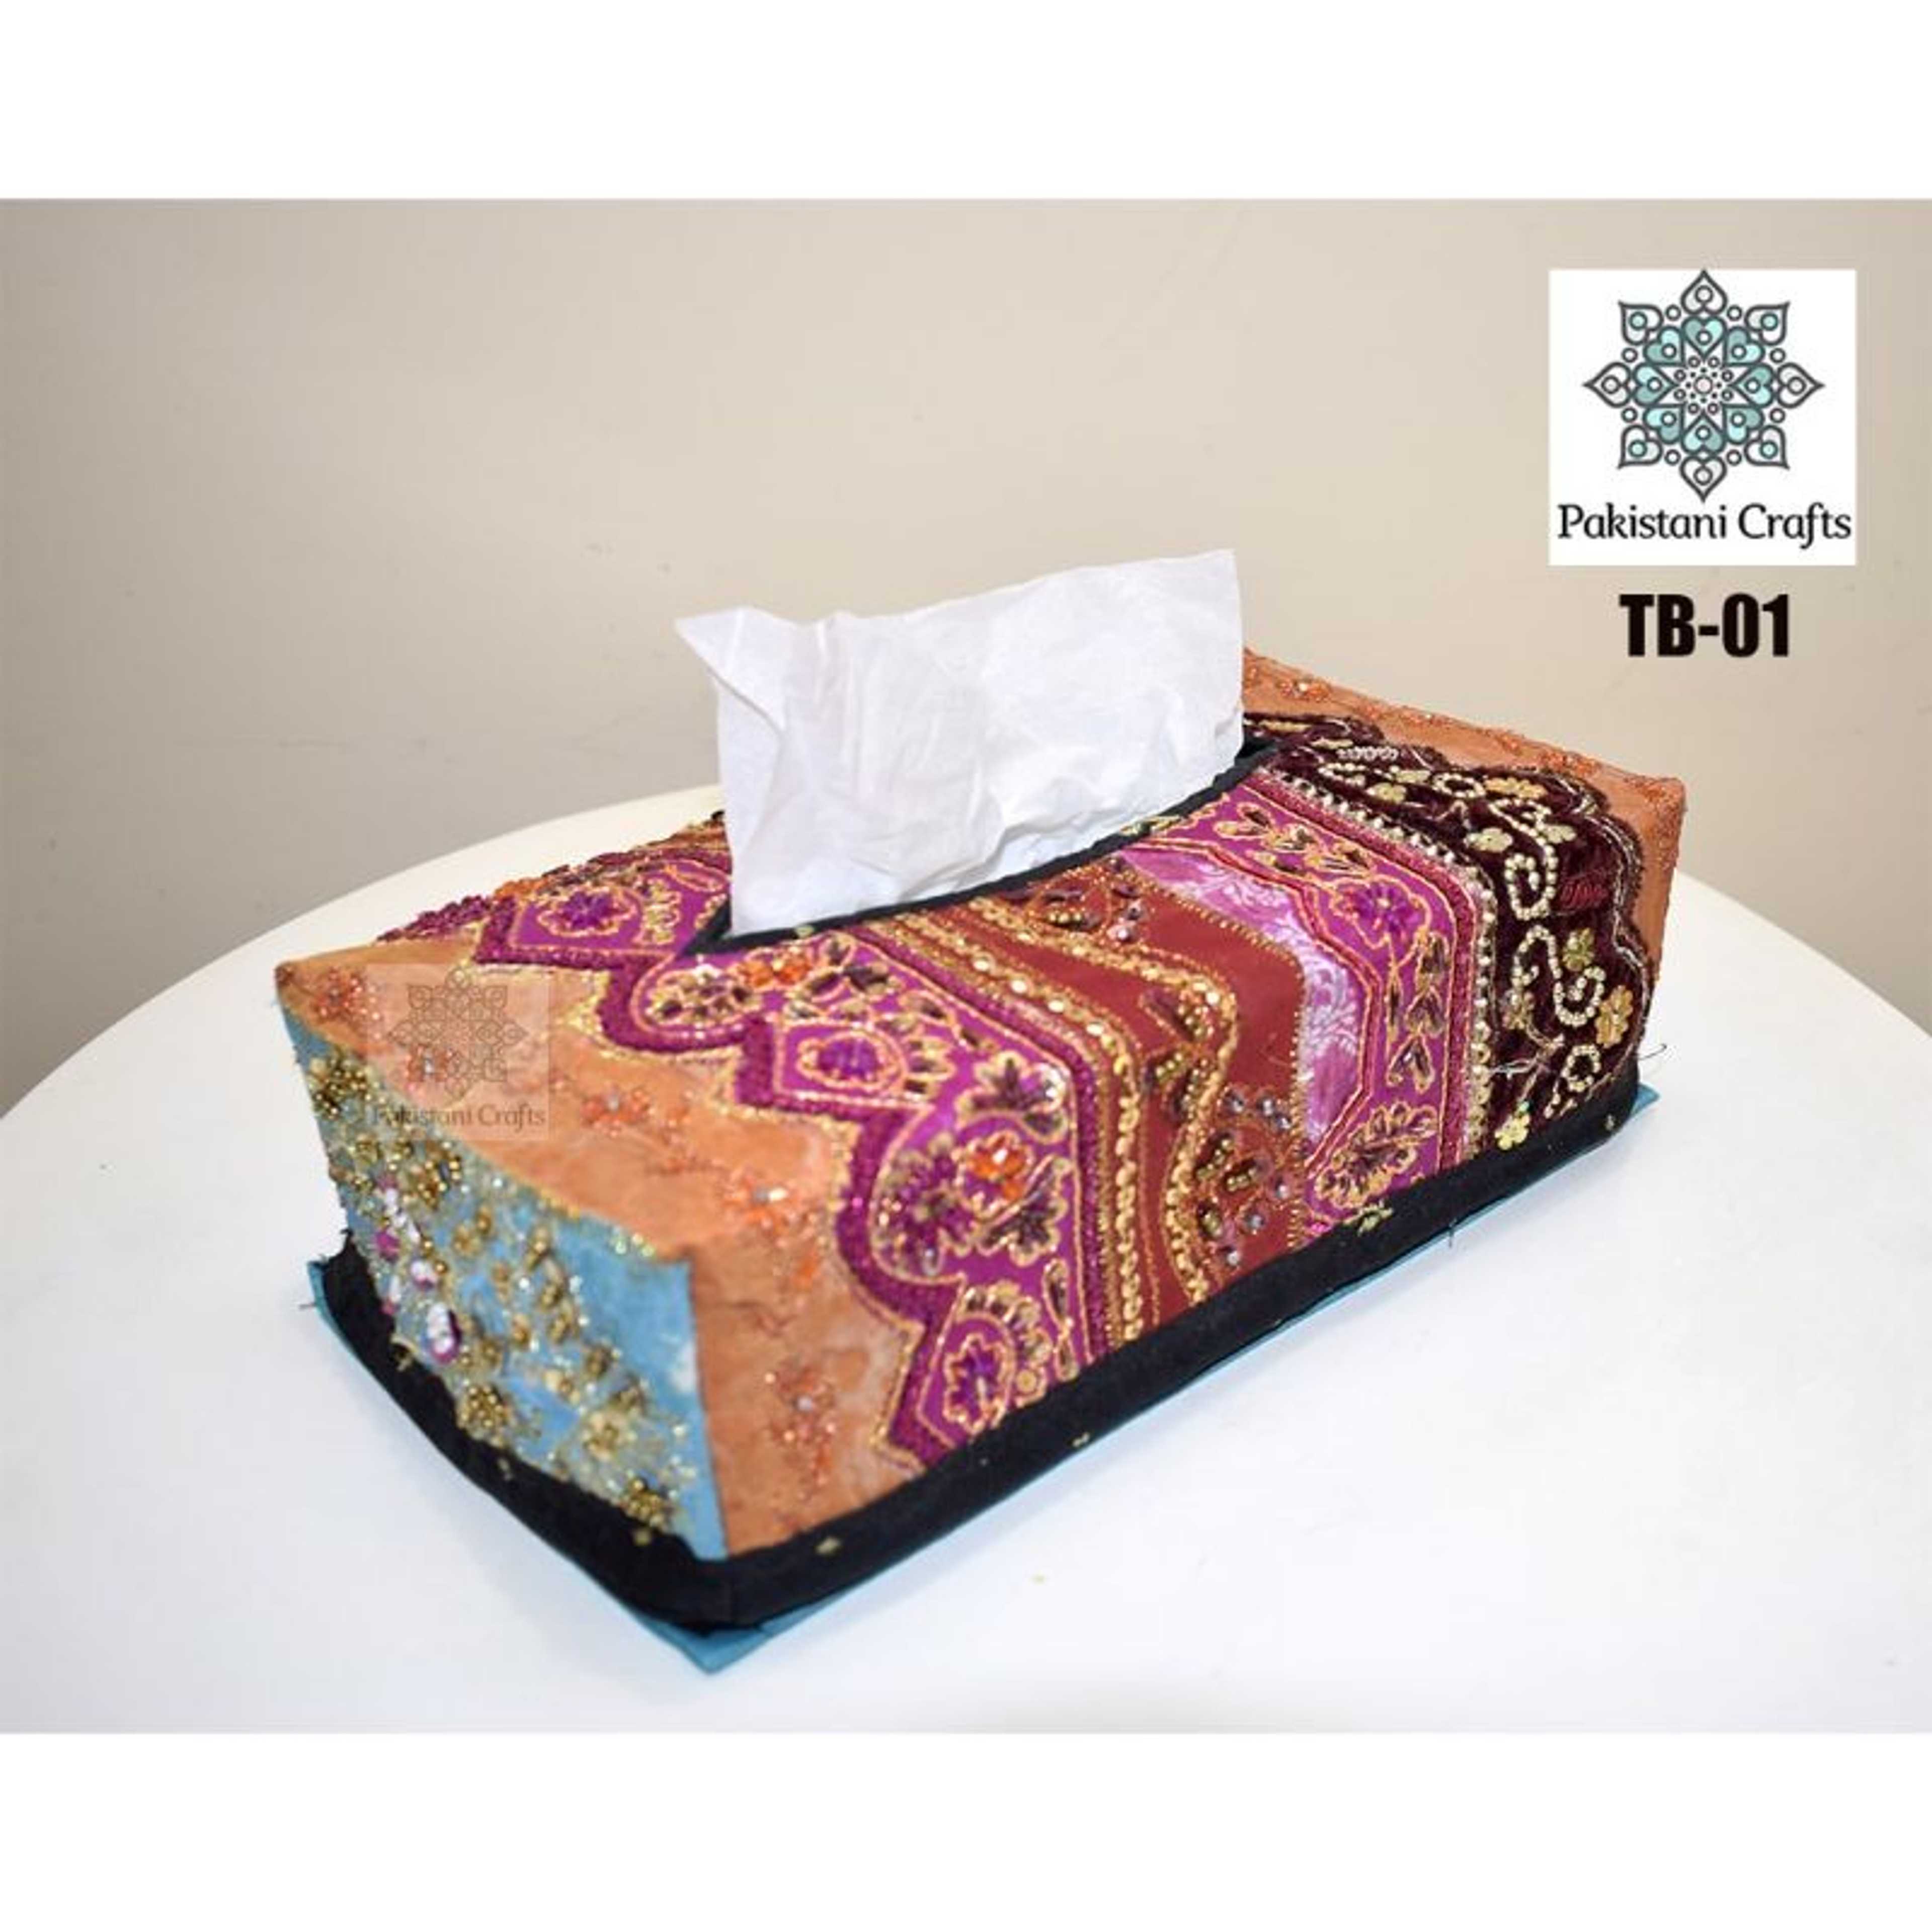 Sindhi Hand Embroidery Tissue Box Cover